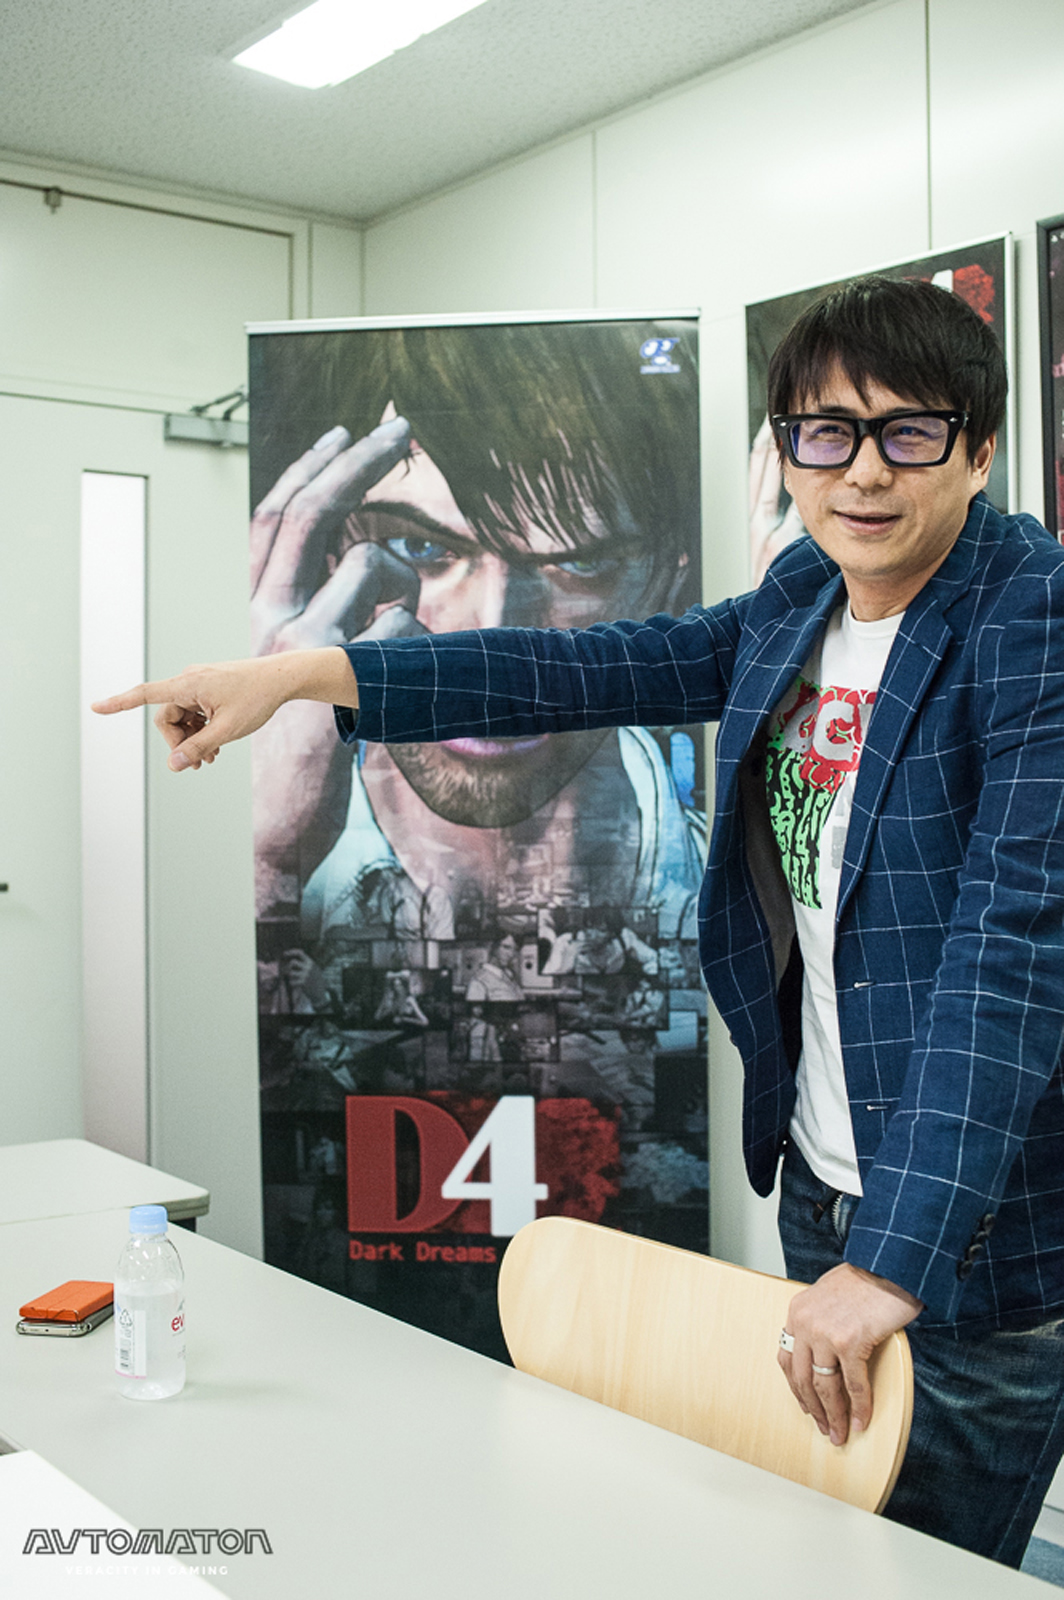 ask-swery-about-pc-d4-release-02-011